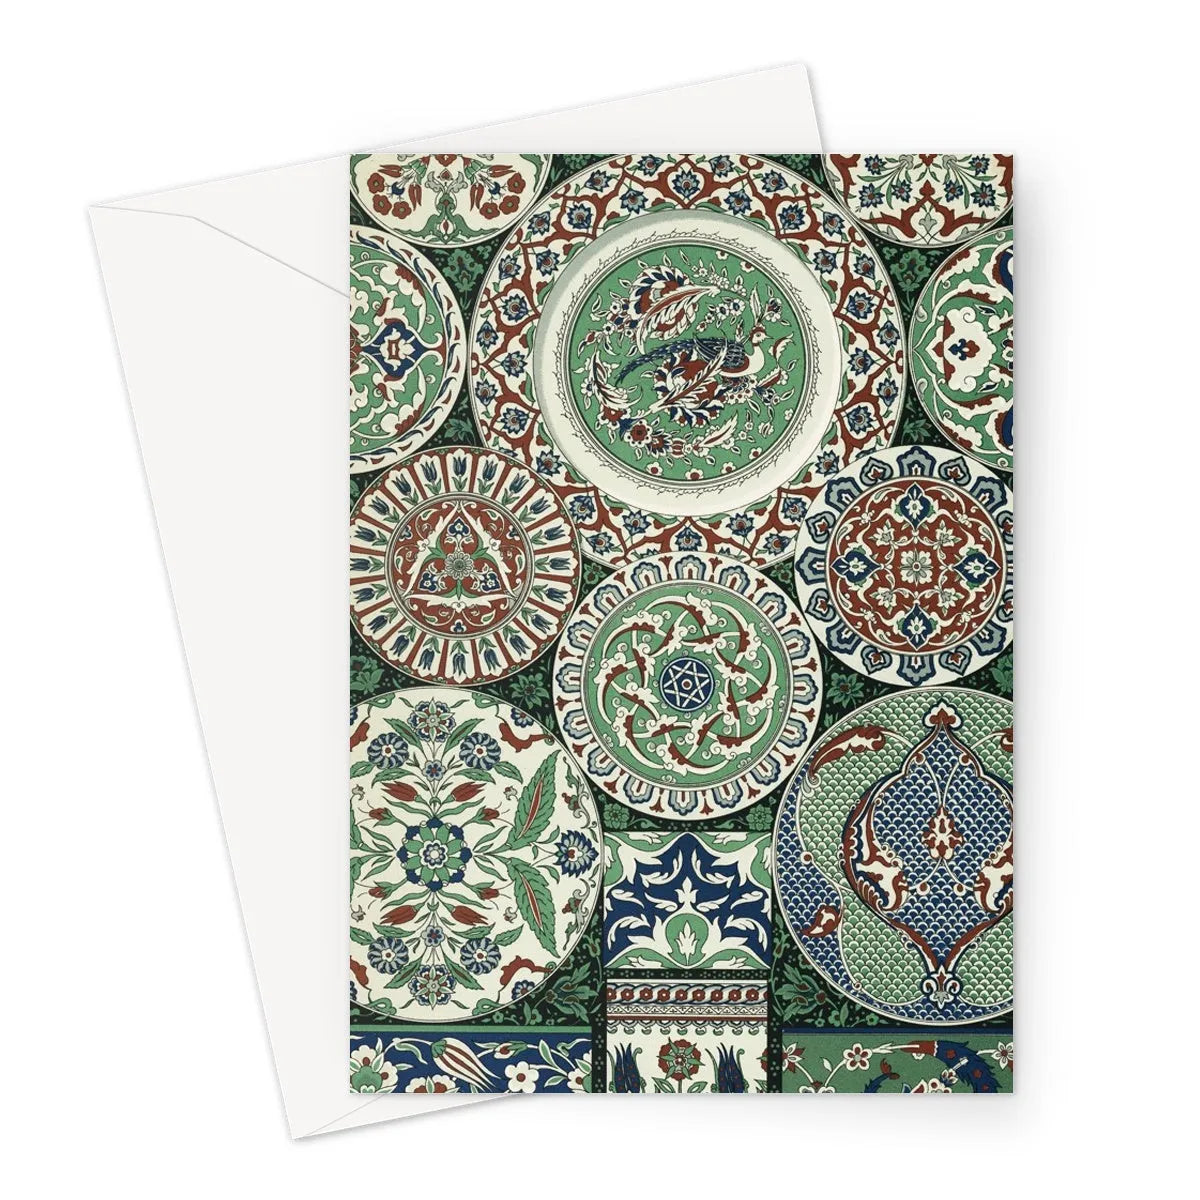 Islamic Pattern By Auguste Racinet Greeting Card - A5 Portrait / 1 Card - Notebooks & Notepads - Aesthetic Art